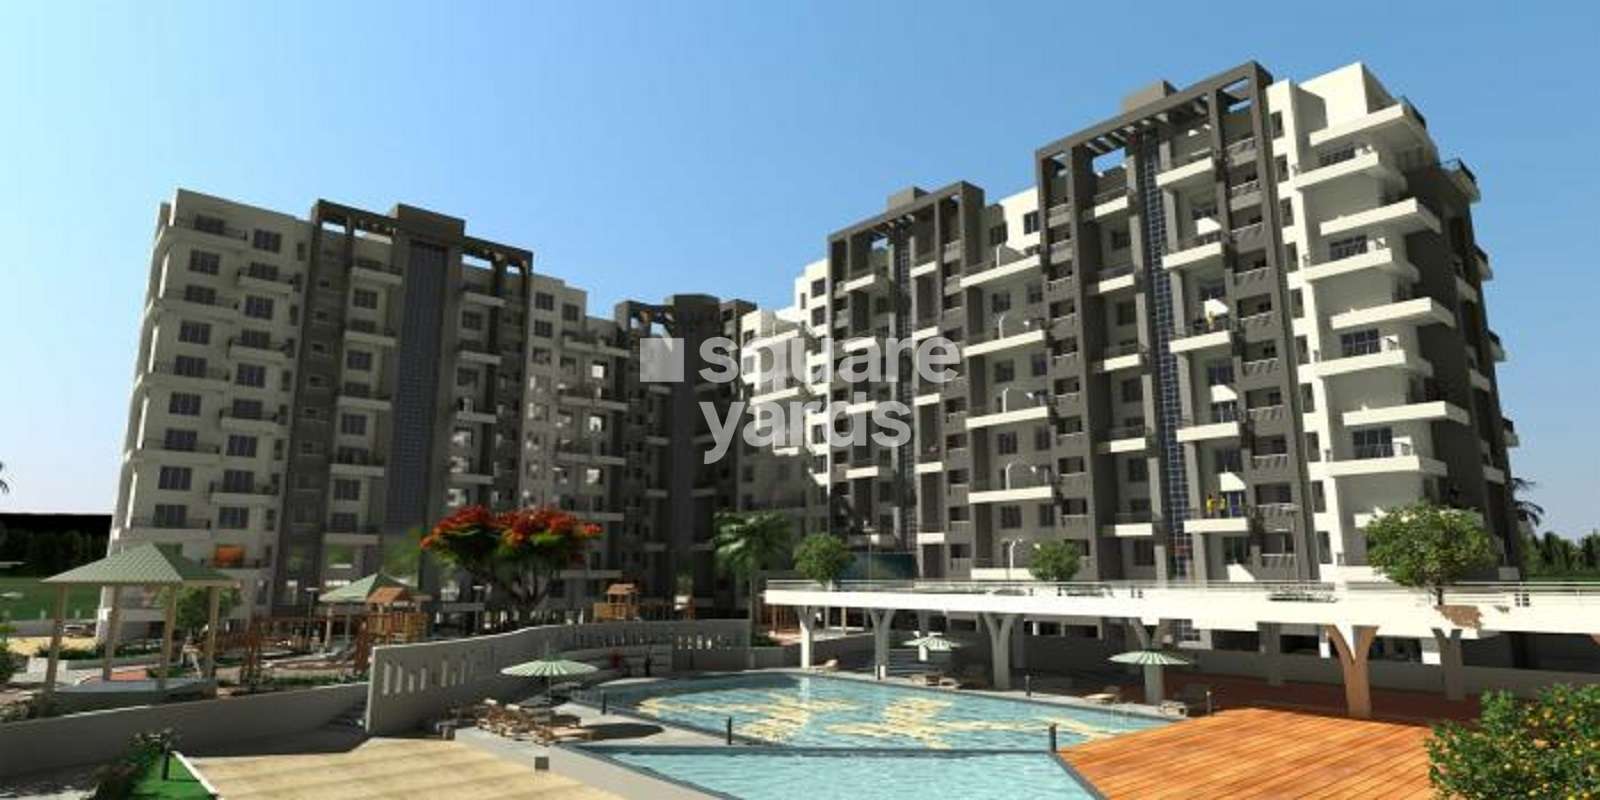 https://static.squareyards.com/resources/images/pune/project-image/ceratec-city-project-project-large-image1.jpg